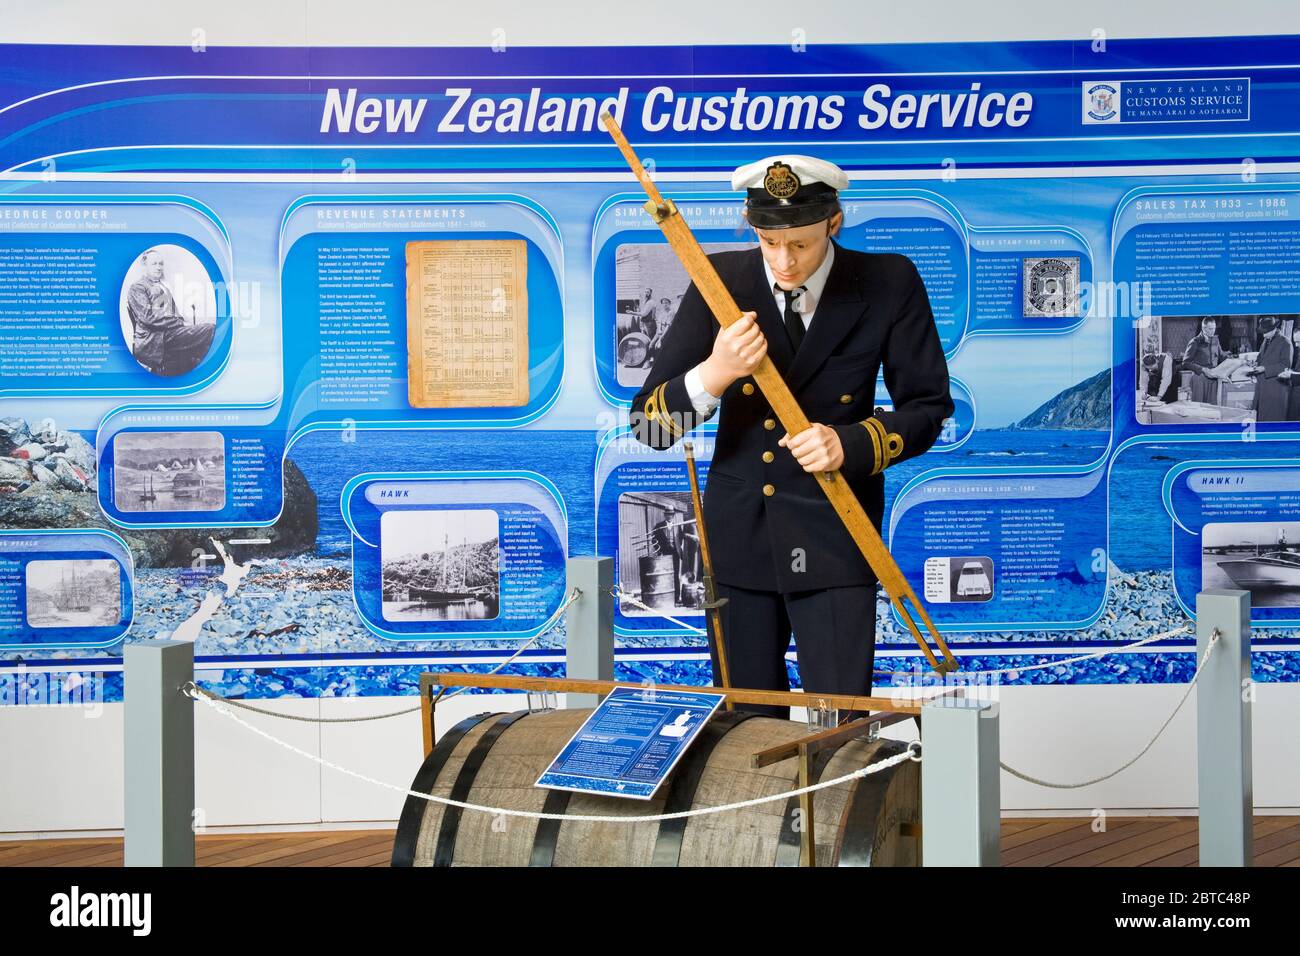 Customs Service exhibit at the National Maritime Museum,Auckland,North Island,New Zealand Stock Photo